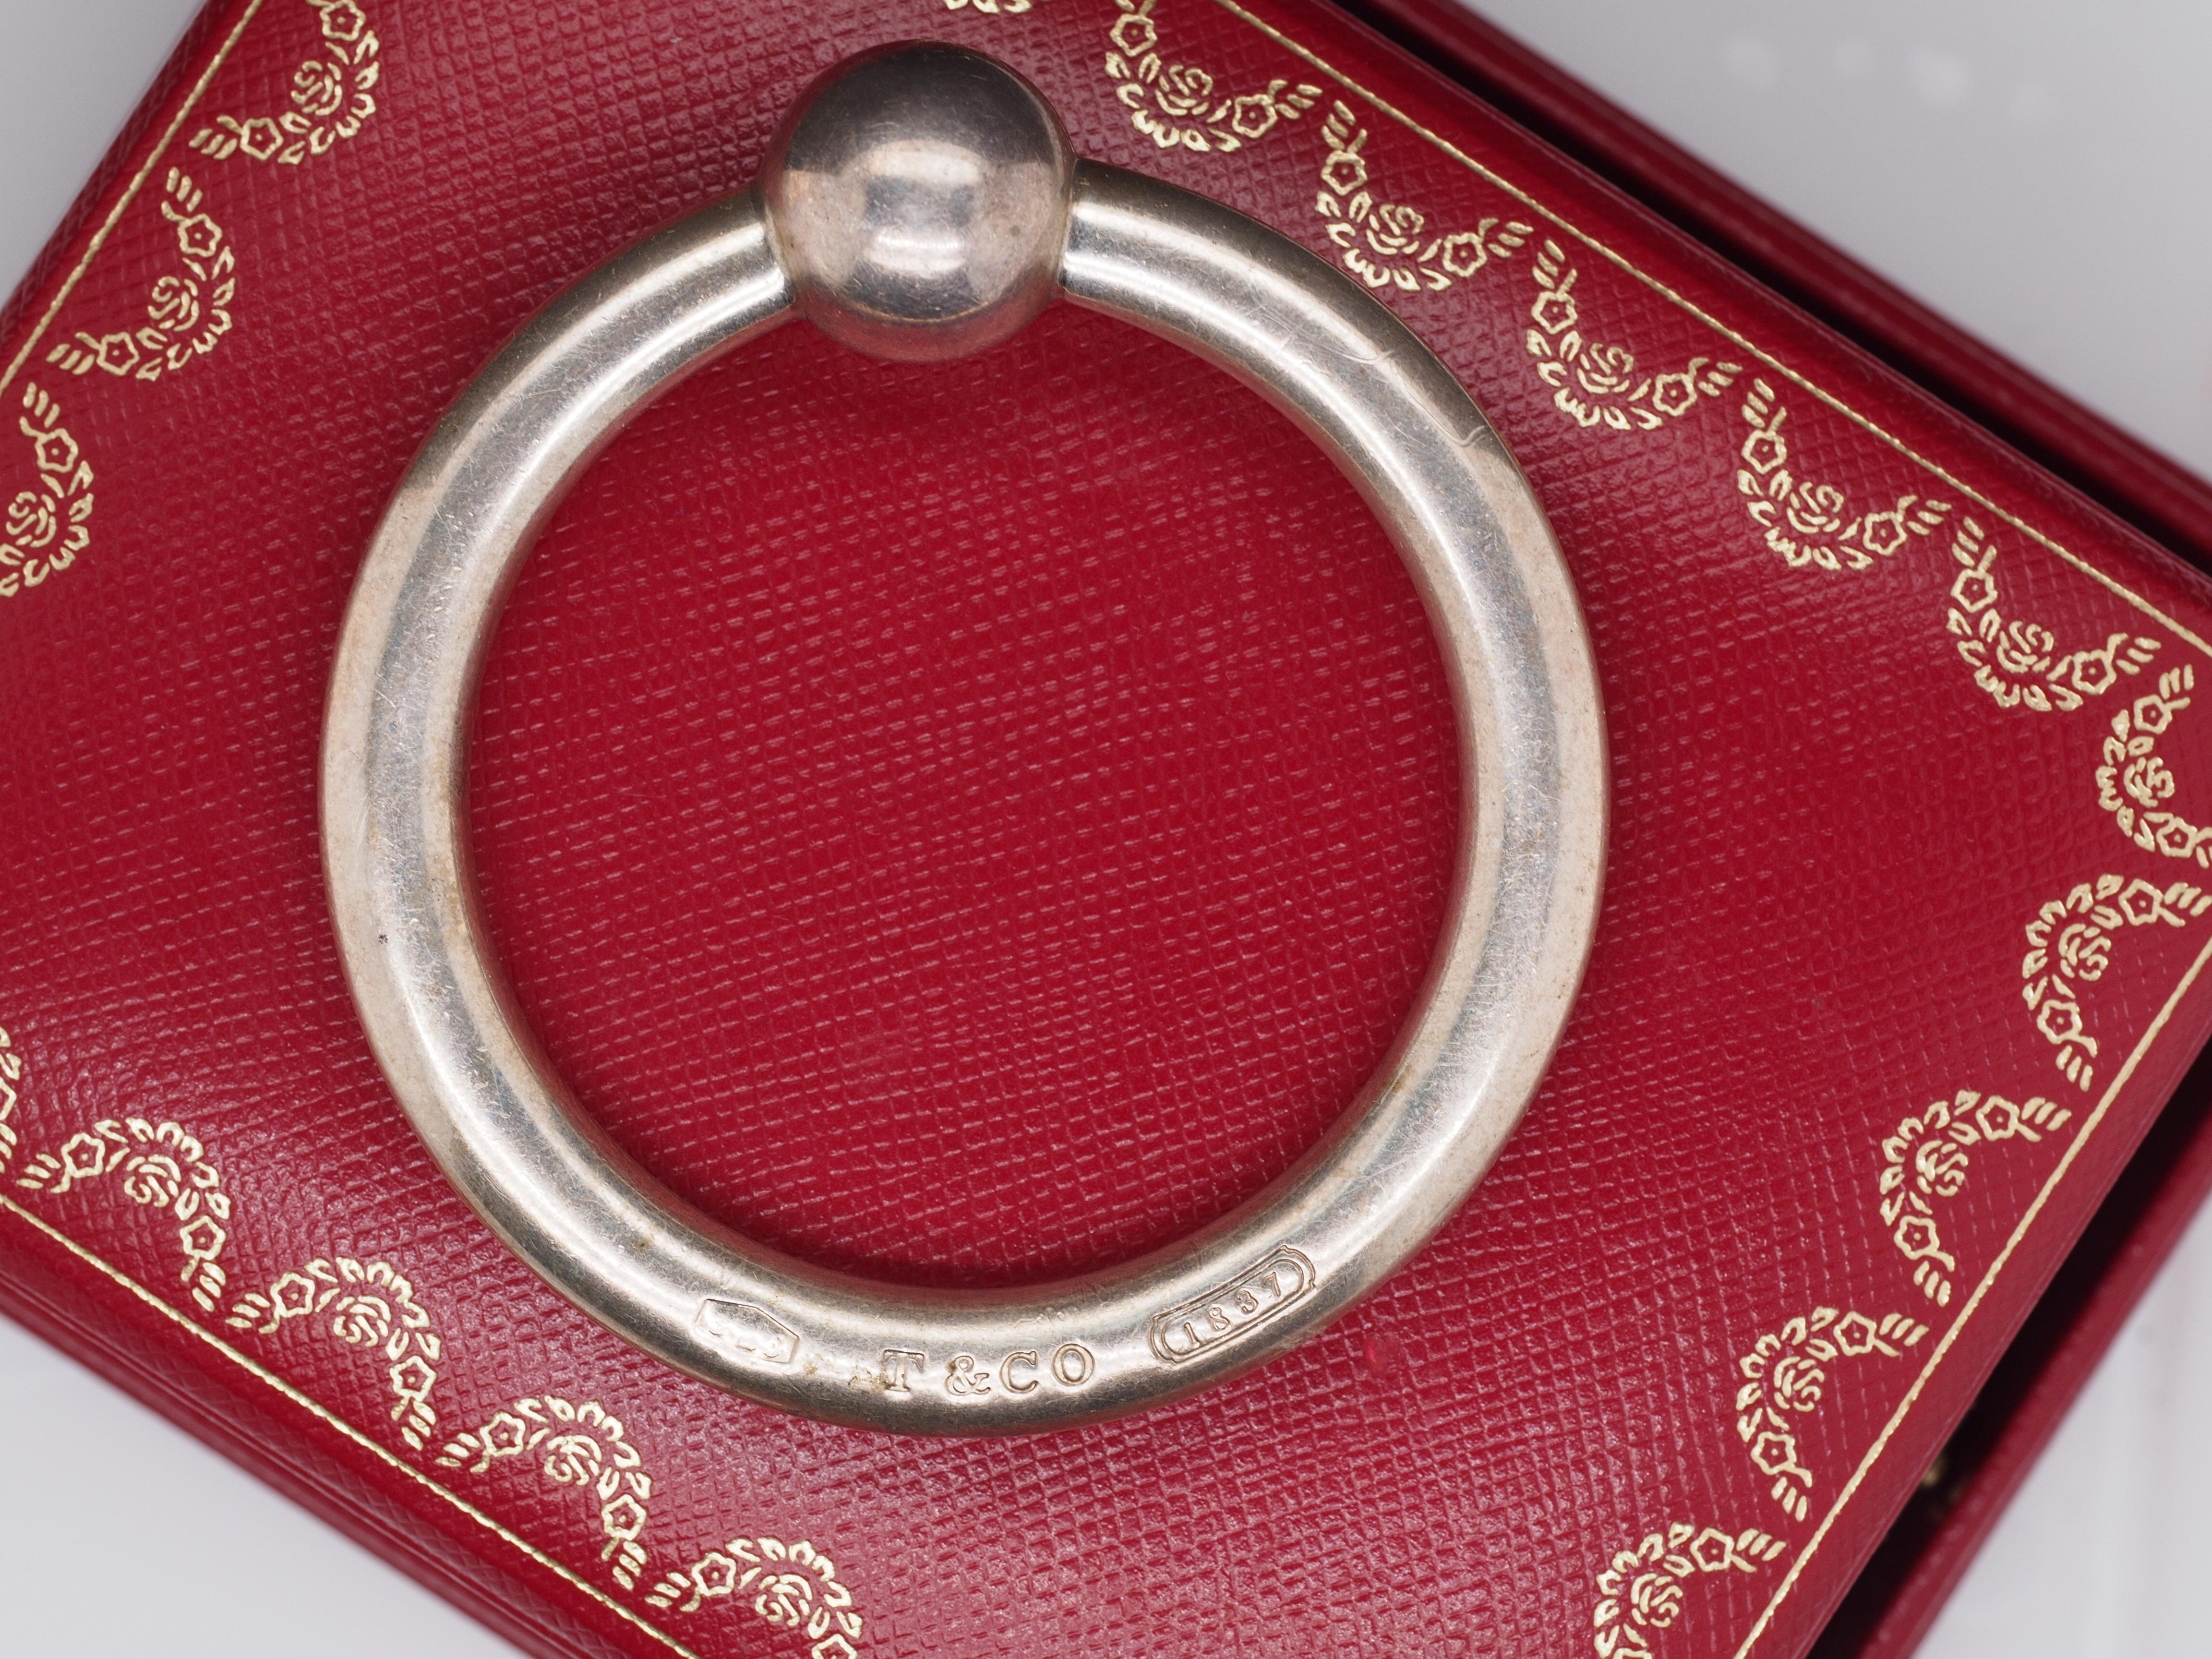 Item Details:
Metal Type: Sterling Silver [Hallmarked, and Tested]
Weight: 17.6 grams
Pin Measurements:
Diameter: 2.25 inches
Condition: Excellent